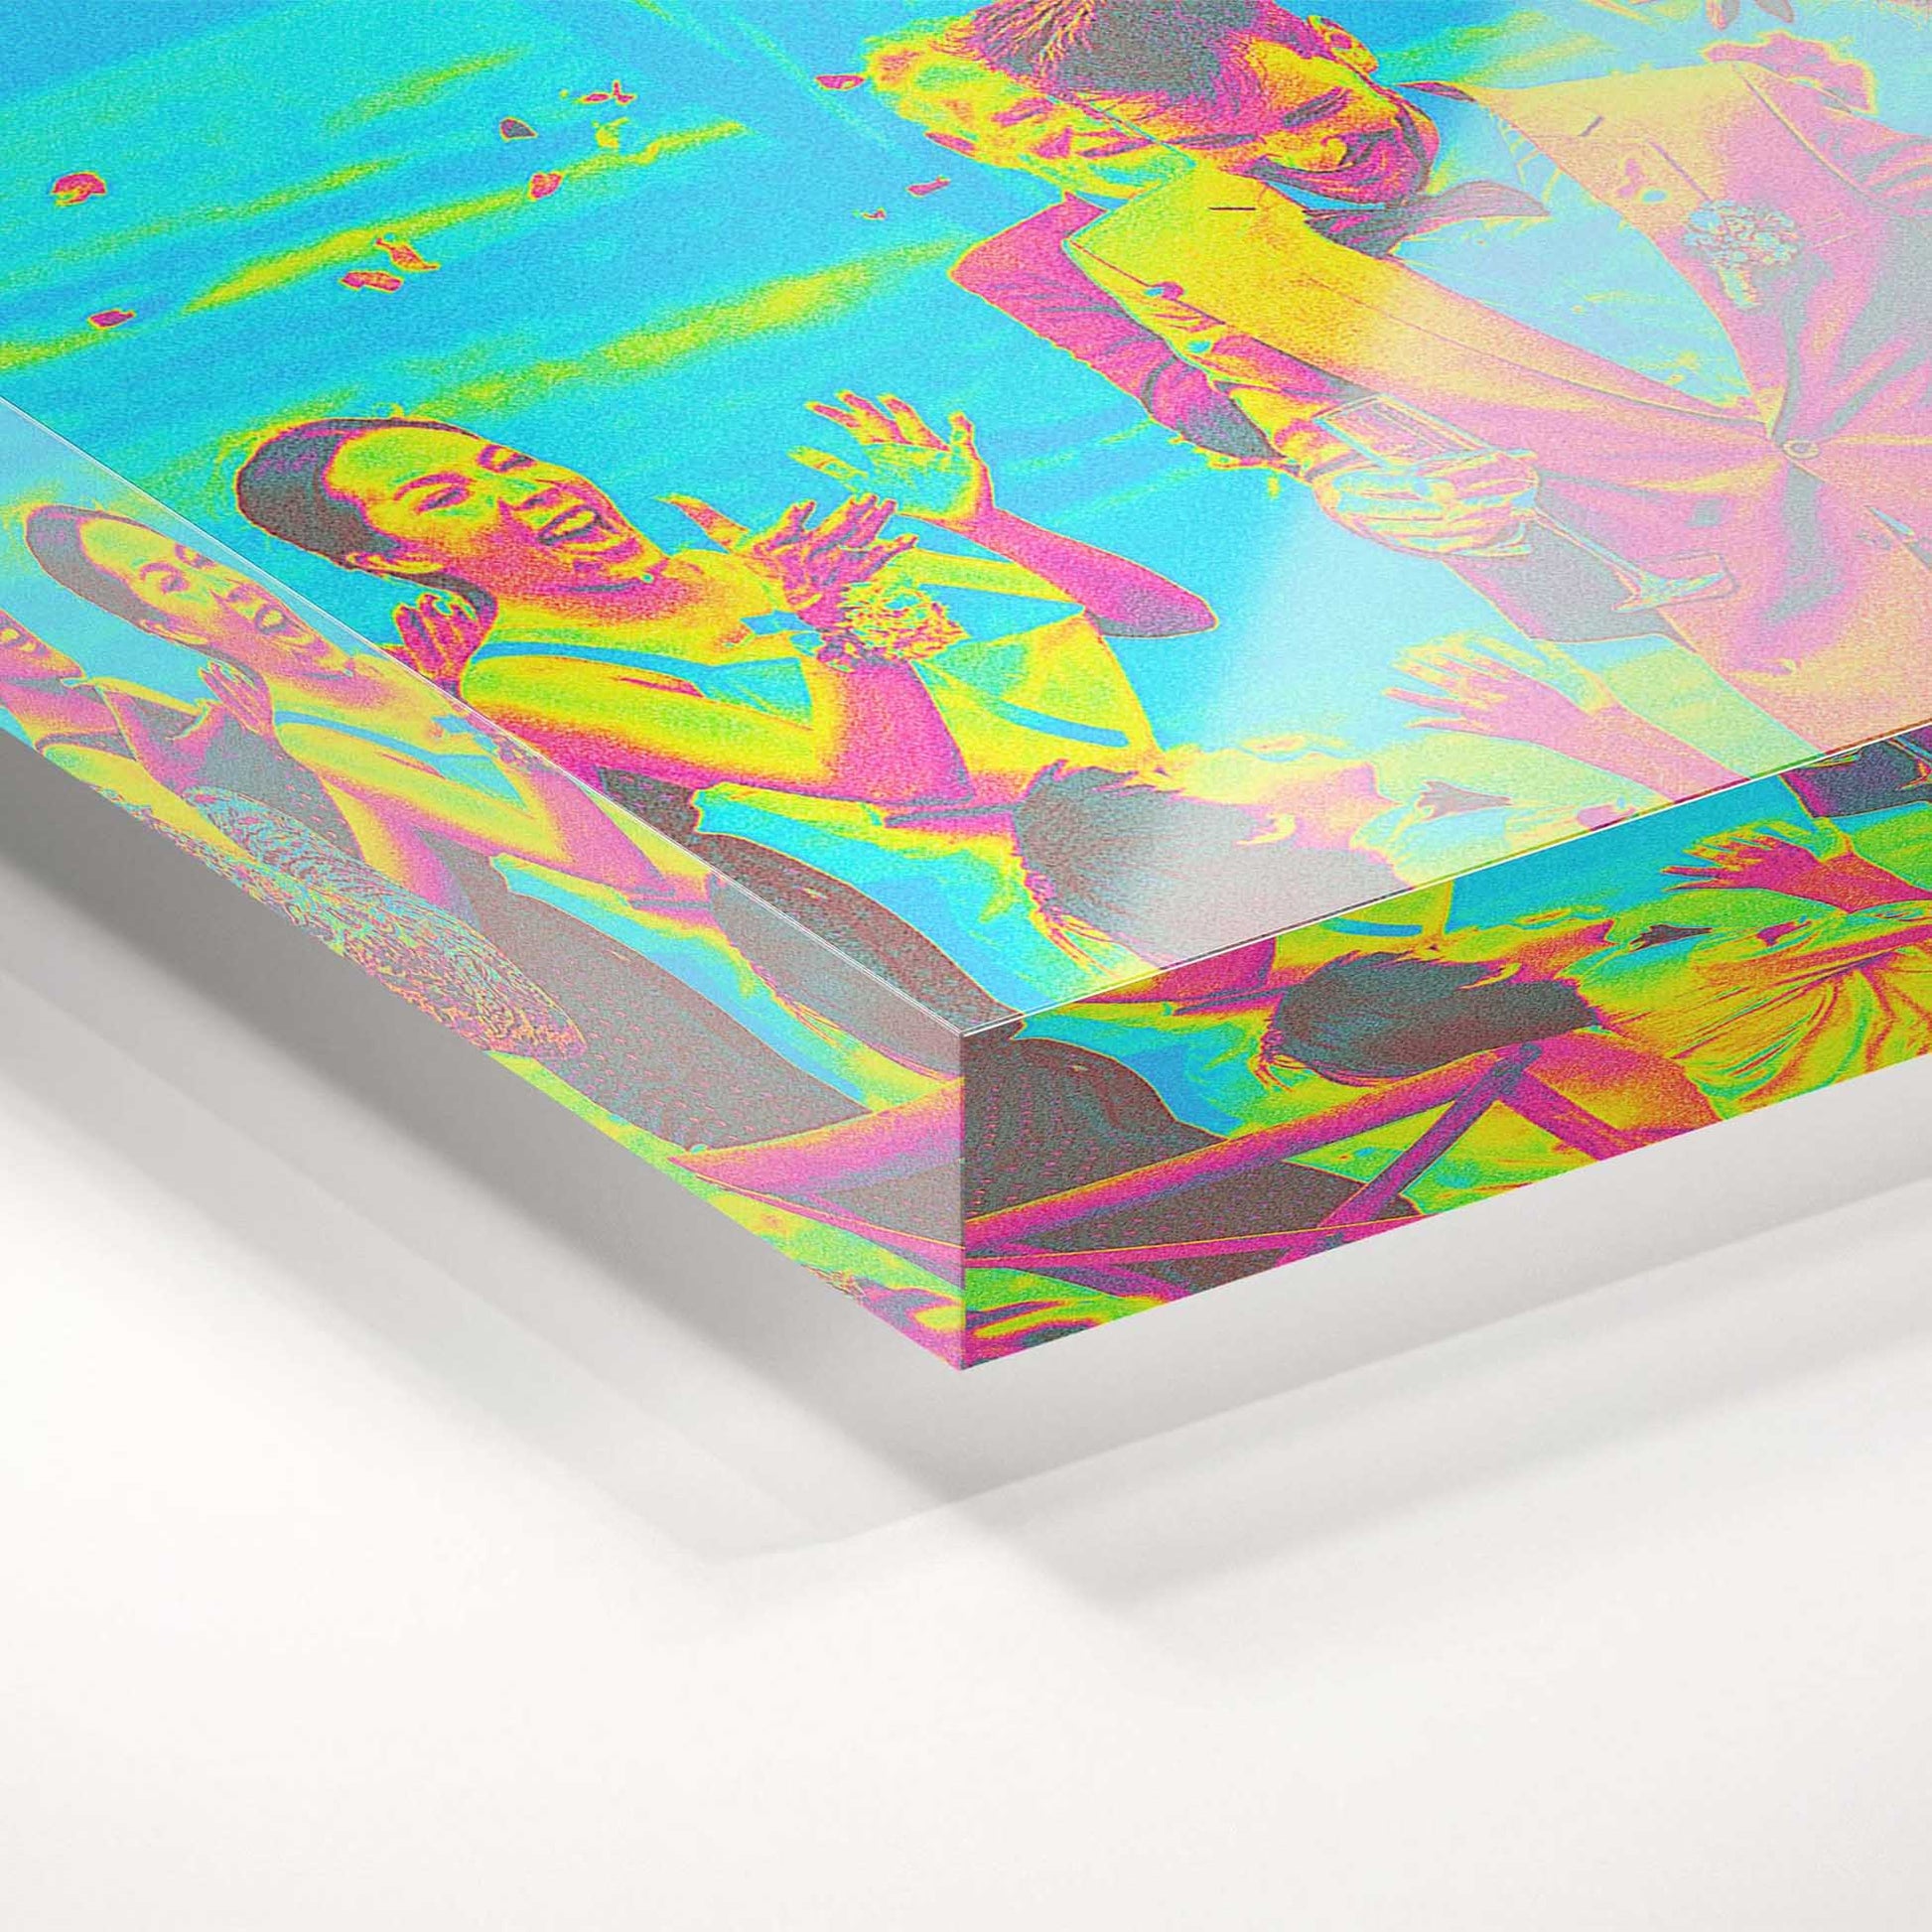 Immerse yourself in a world of vibrant imagination with this personalised Acid Trip Effect Acrylic Block Photo. The vivid colors and unique pattern create a captivating and eye-catching artwork that will bring joy and inspiration to your home or office